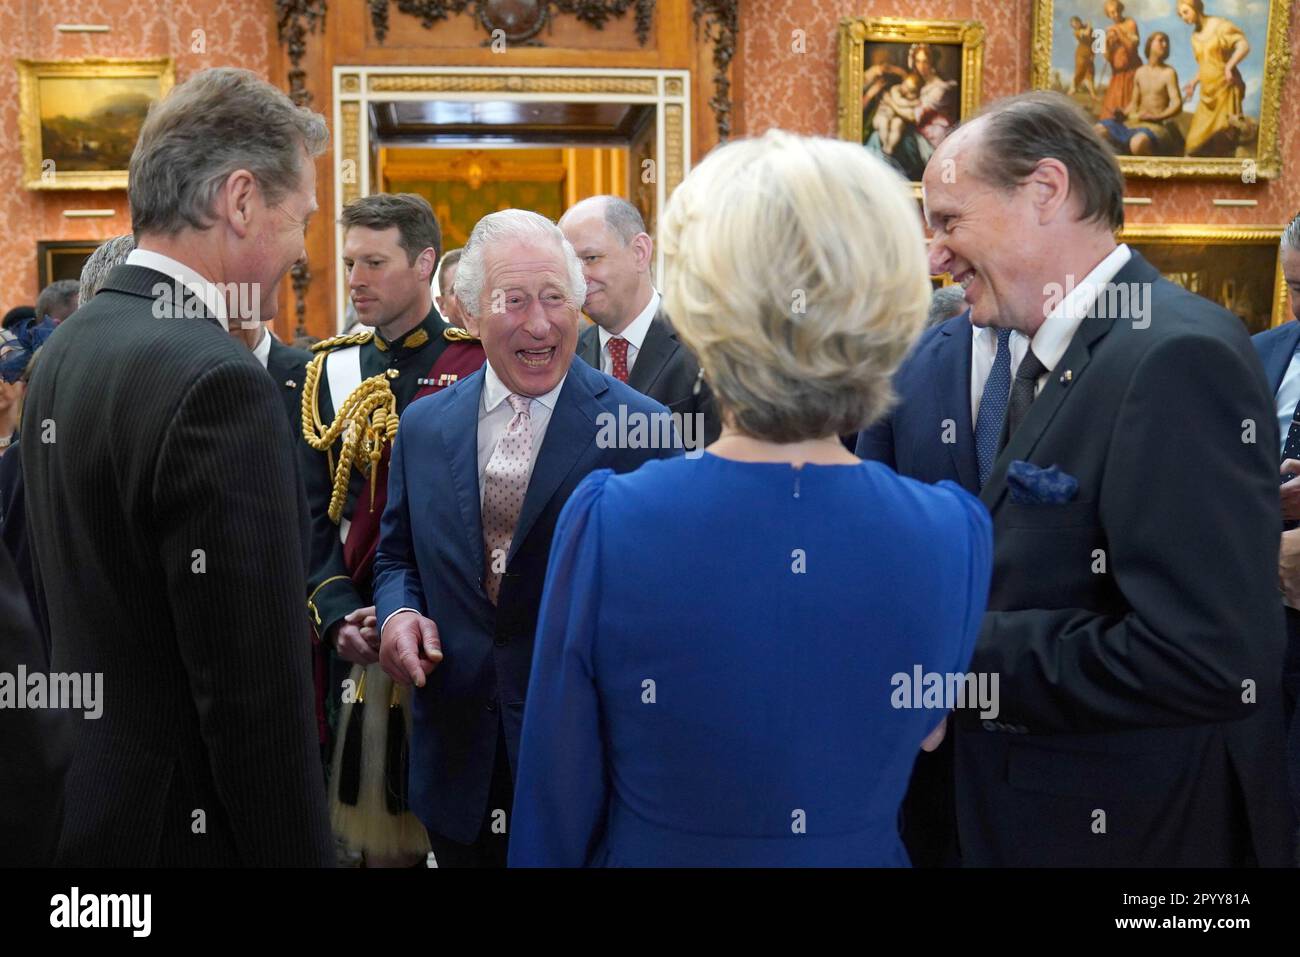 King Charles III (centre) shares a joke with the President of the European Commission Ursula von der Leyen, during a reception at Buckingham Palace, in London, for overseas guests attending his coronation. Picture date: Friday May 5, 2023. Stock Photo